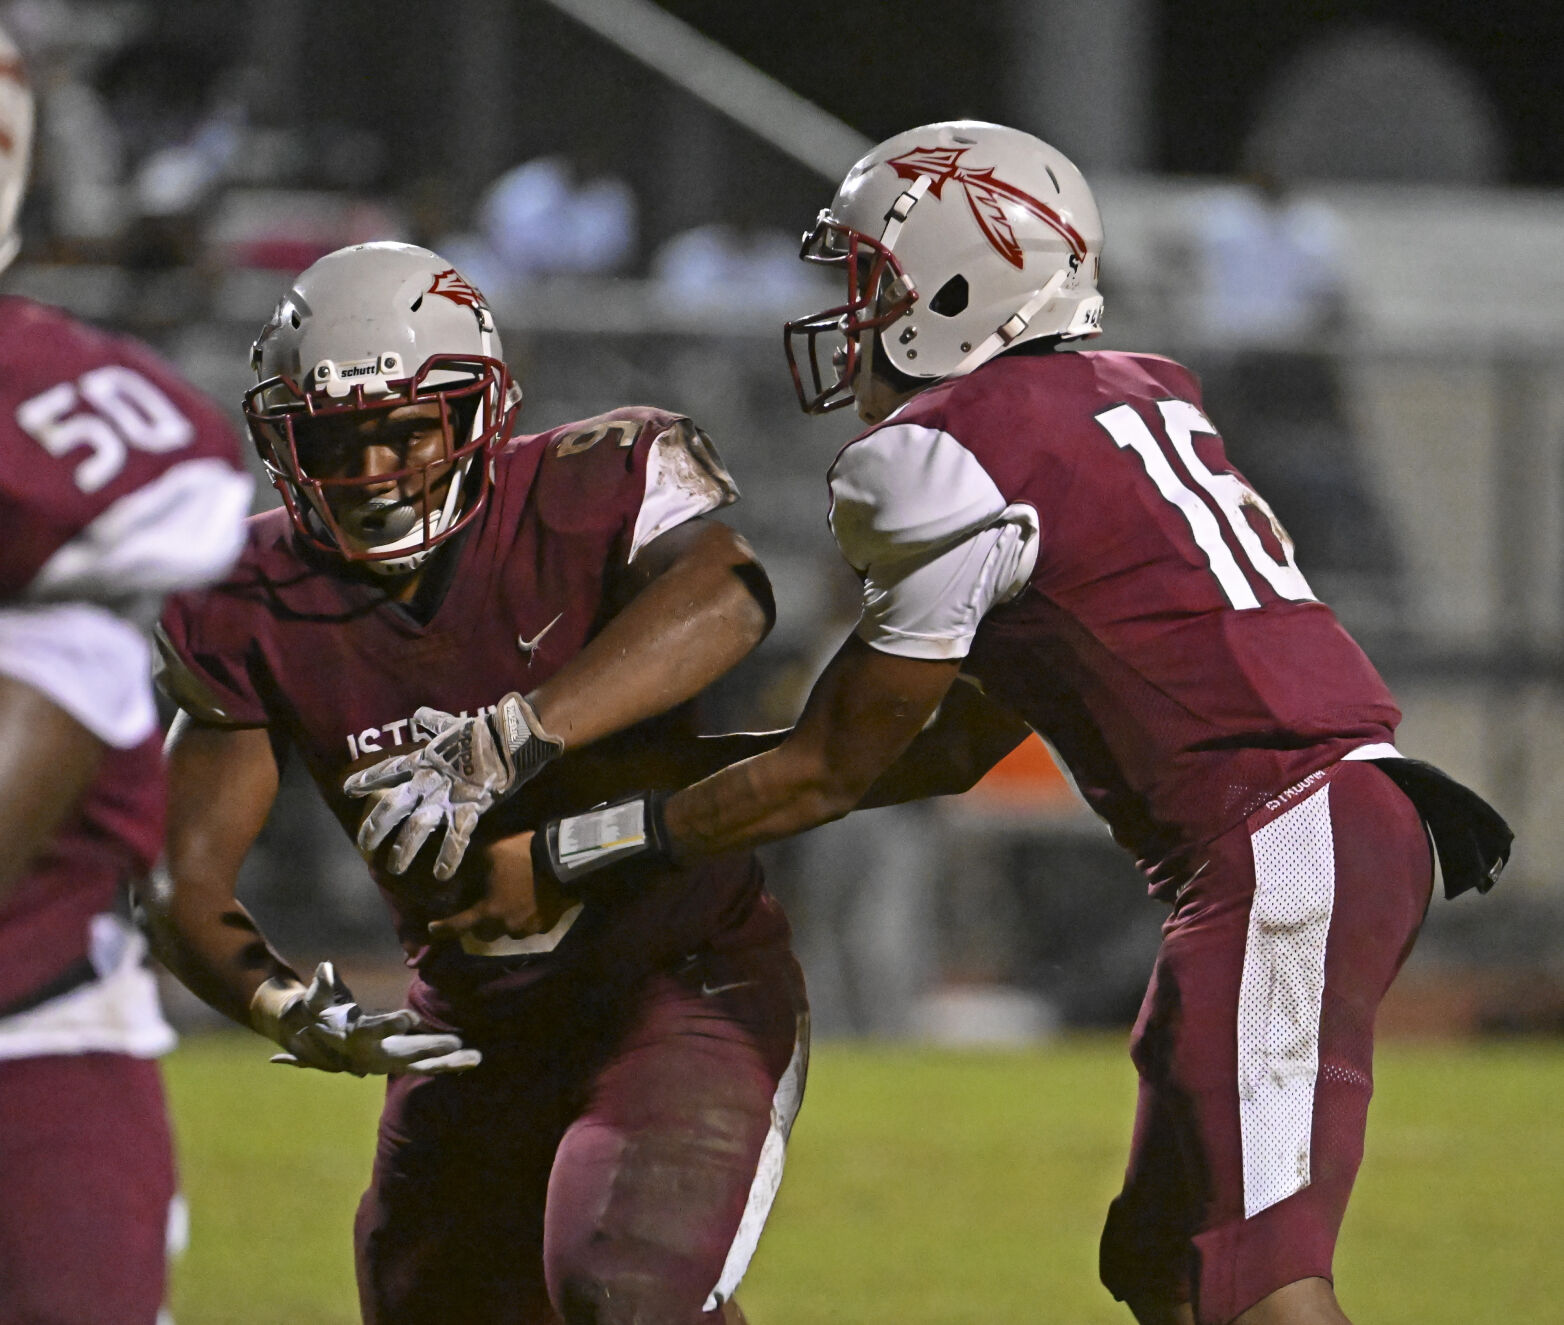 Take 2? After snapping 26-game losing streak, Broadmoor eyes Istrouma, more wins High School Sports theadvocate